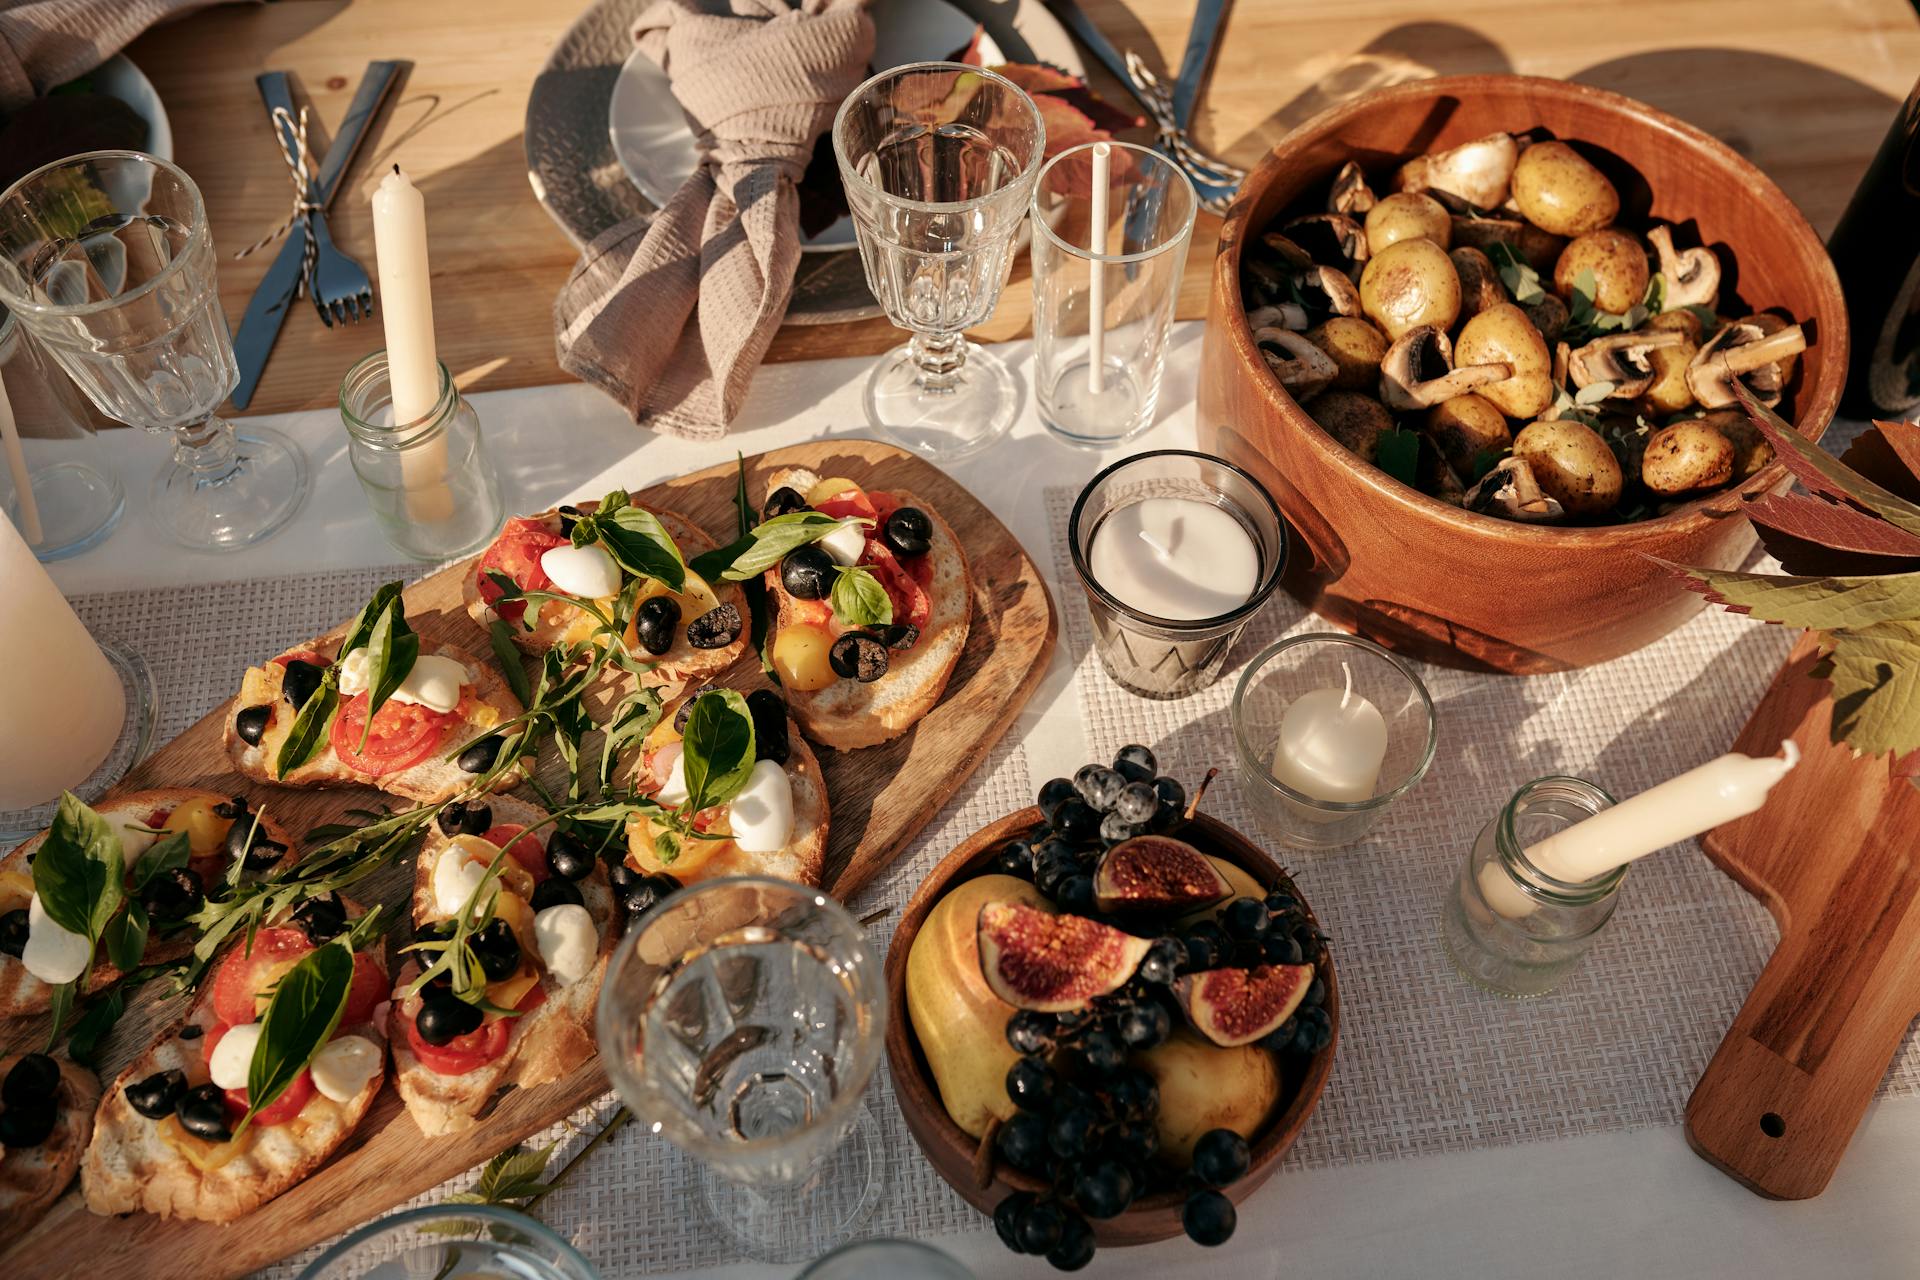 Food on a table | Source: Pexels